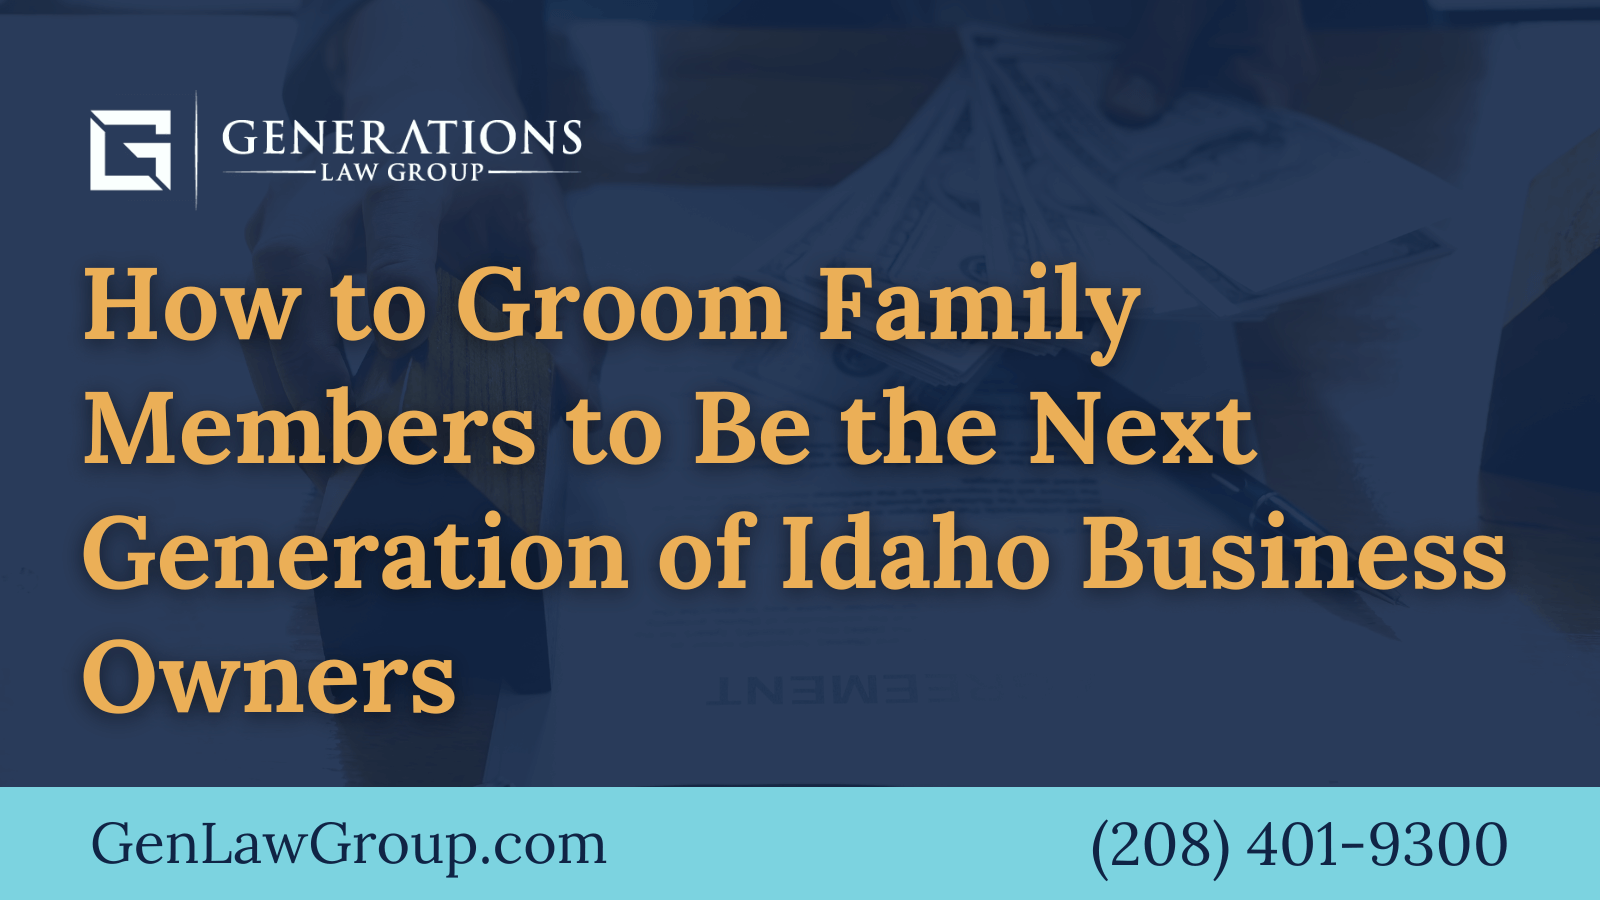 How to Groom Family Members to Be the Next Generation of Idaho Business Owners